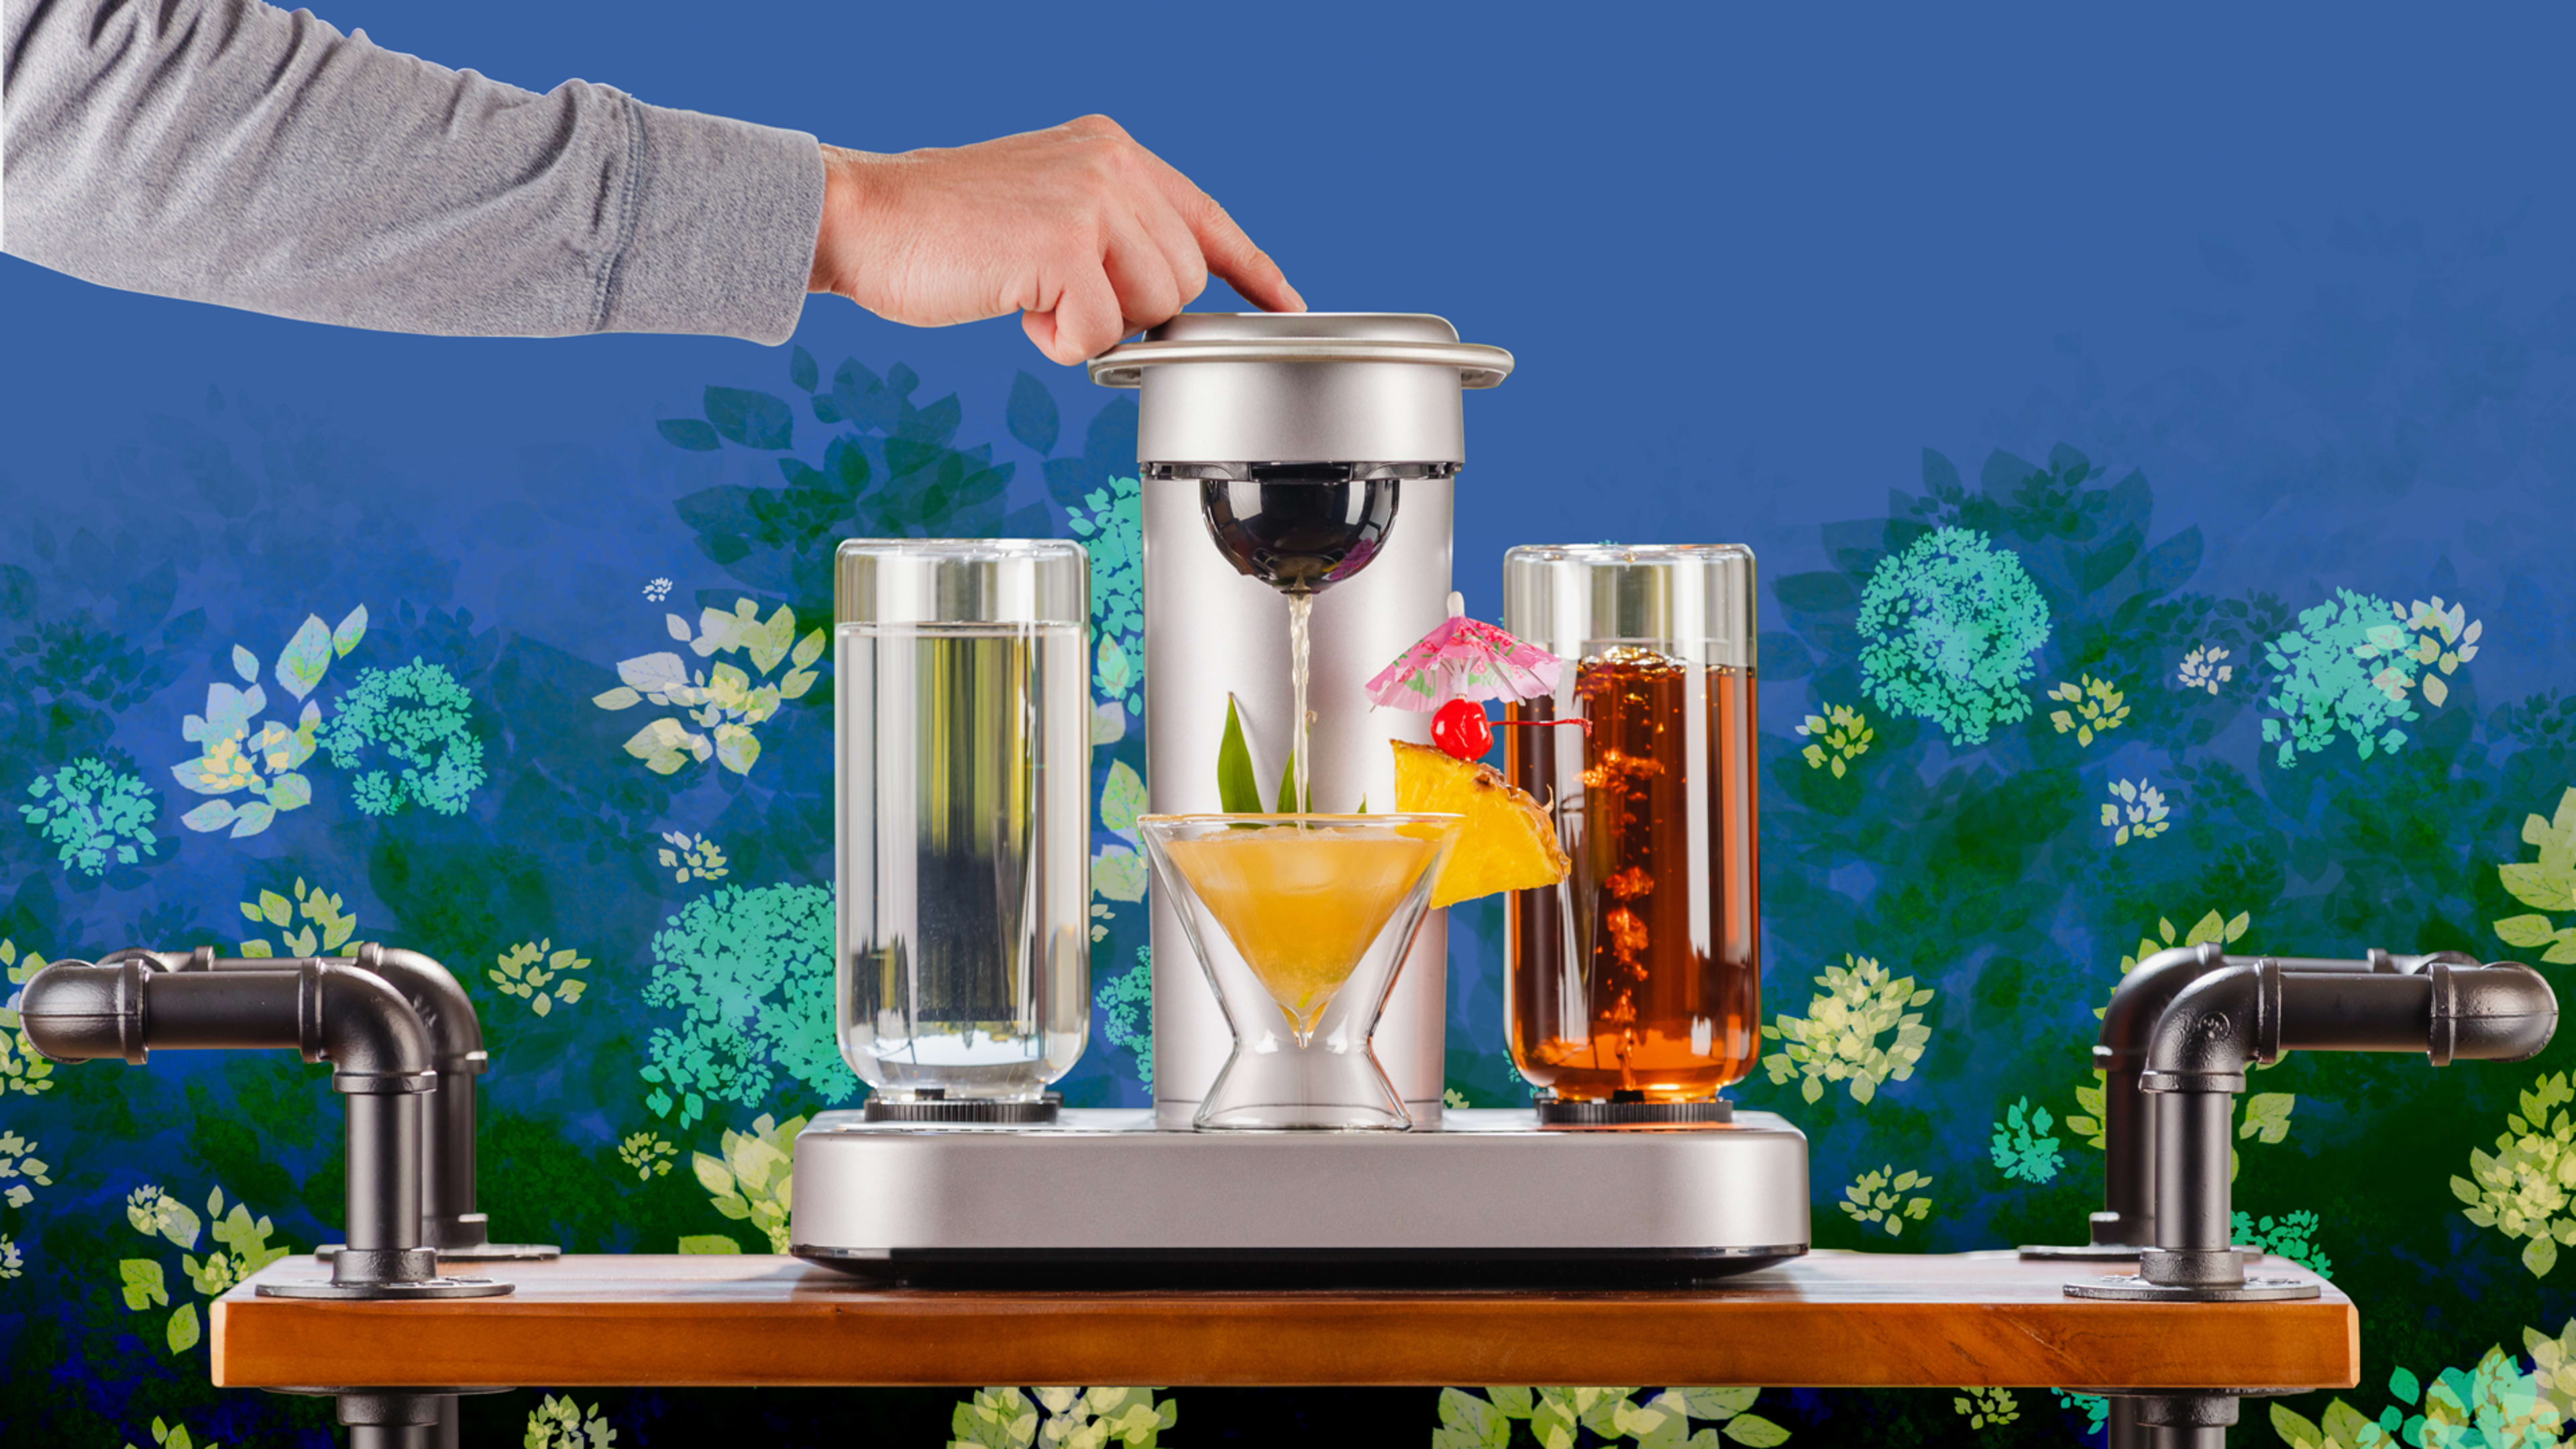 The Keurig of cocktails is surprisingly satisfying to use